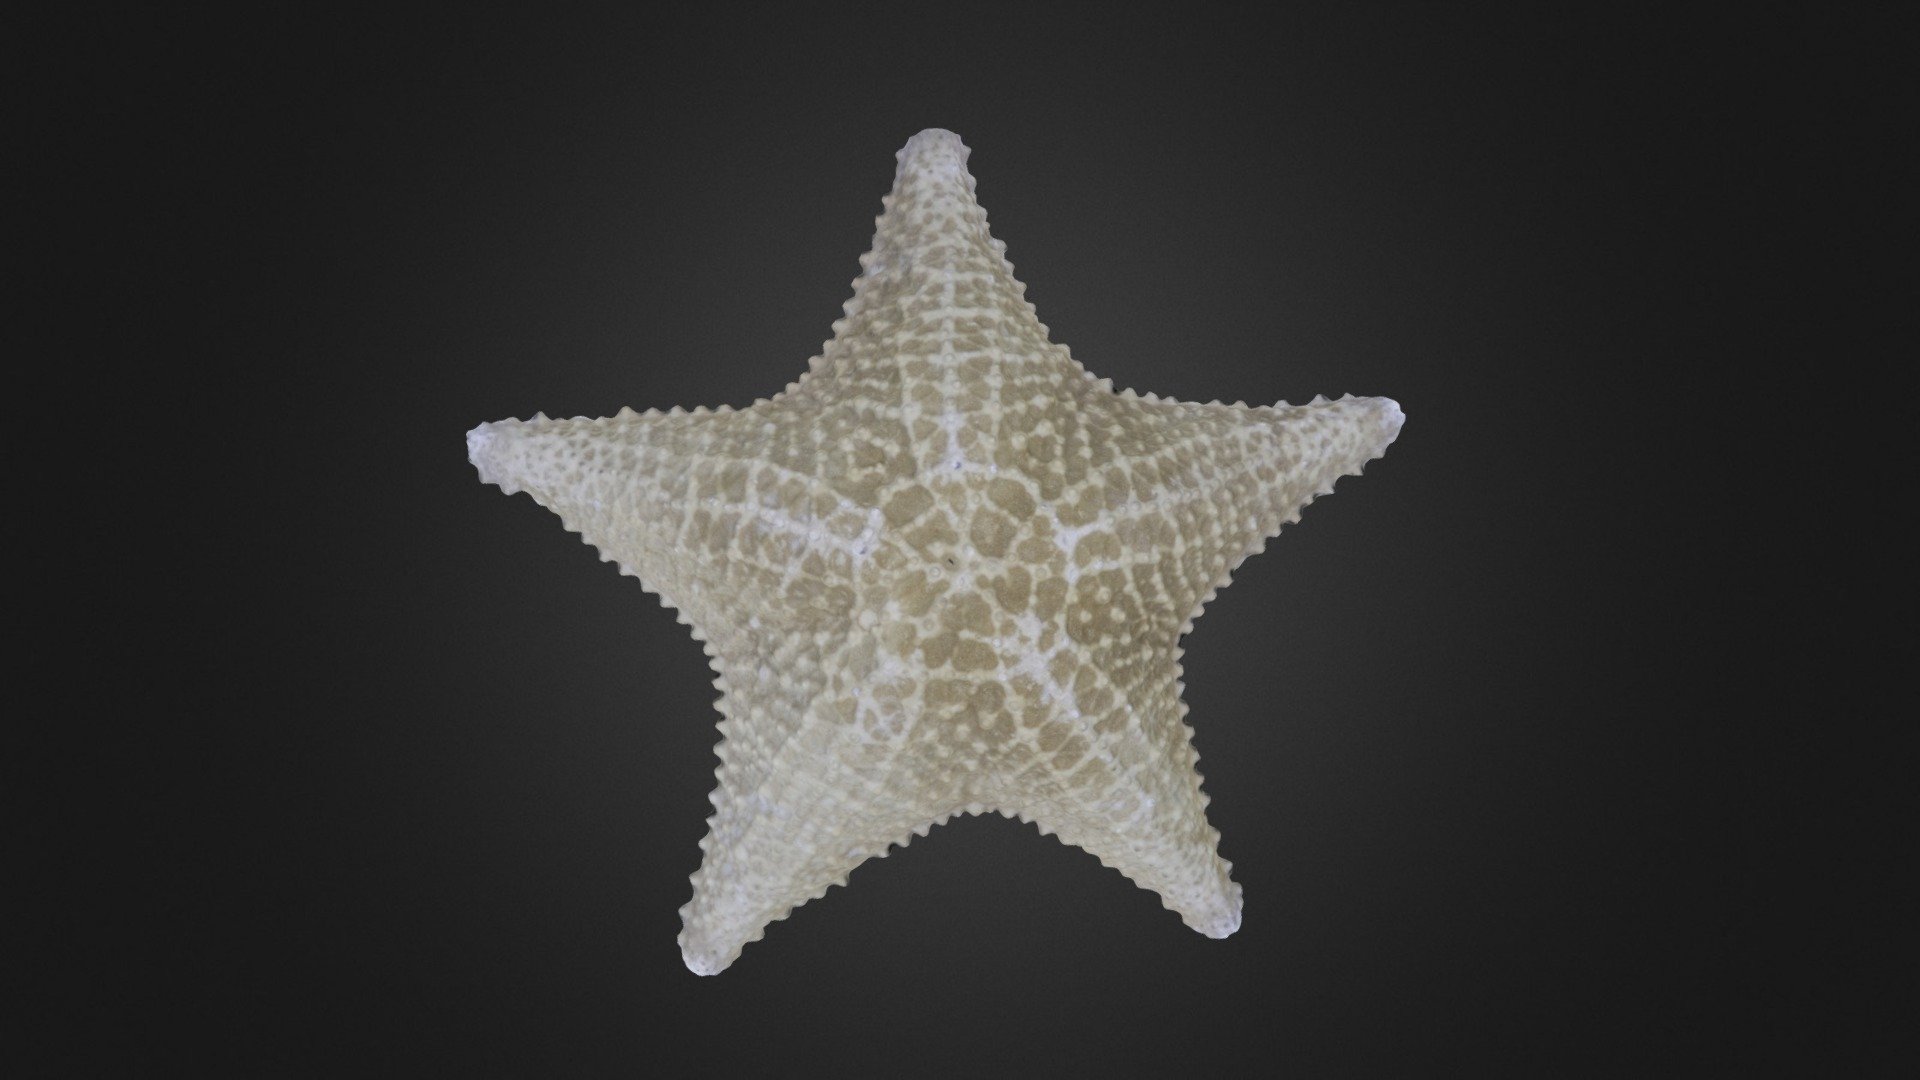 Modern specimen of starfish (or, seastar) (locality information unavailable). Specimen is from the teaching collections of the Paleontological Research Institution, Ithaca, New York. Maximum diameter of specimen is approximately 24 cm. Model by Emily Hauf 3d model